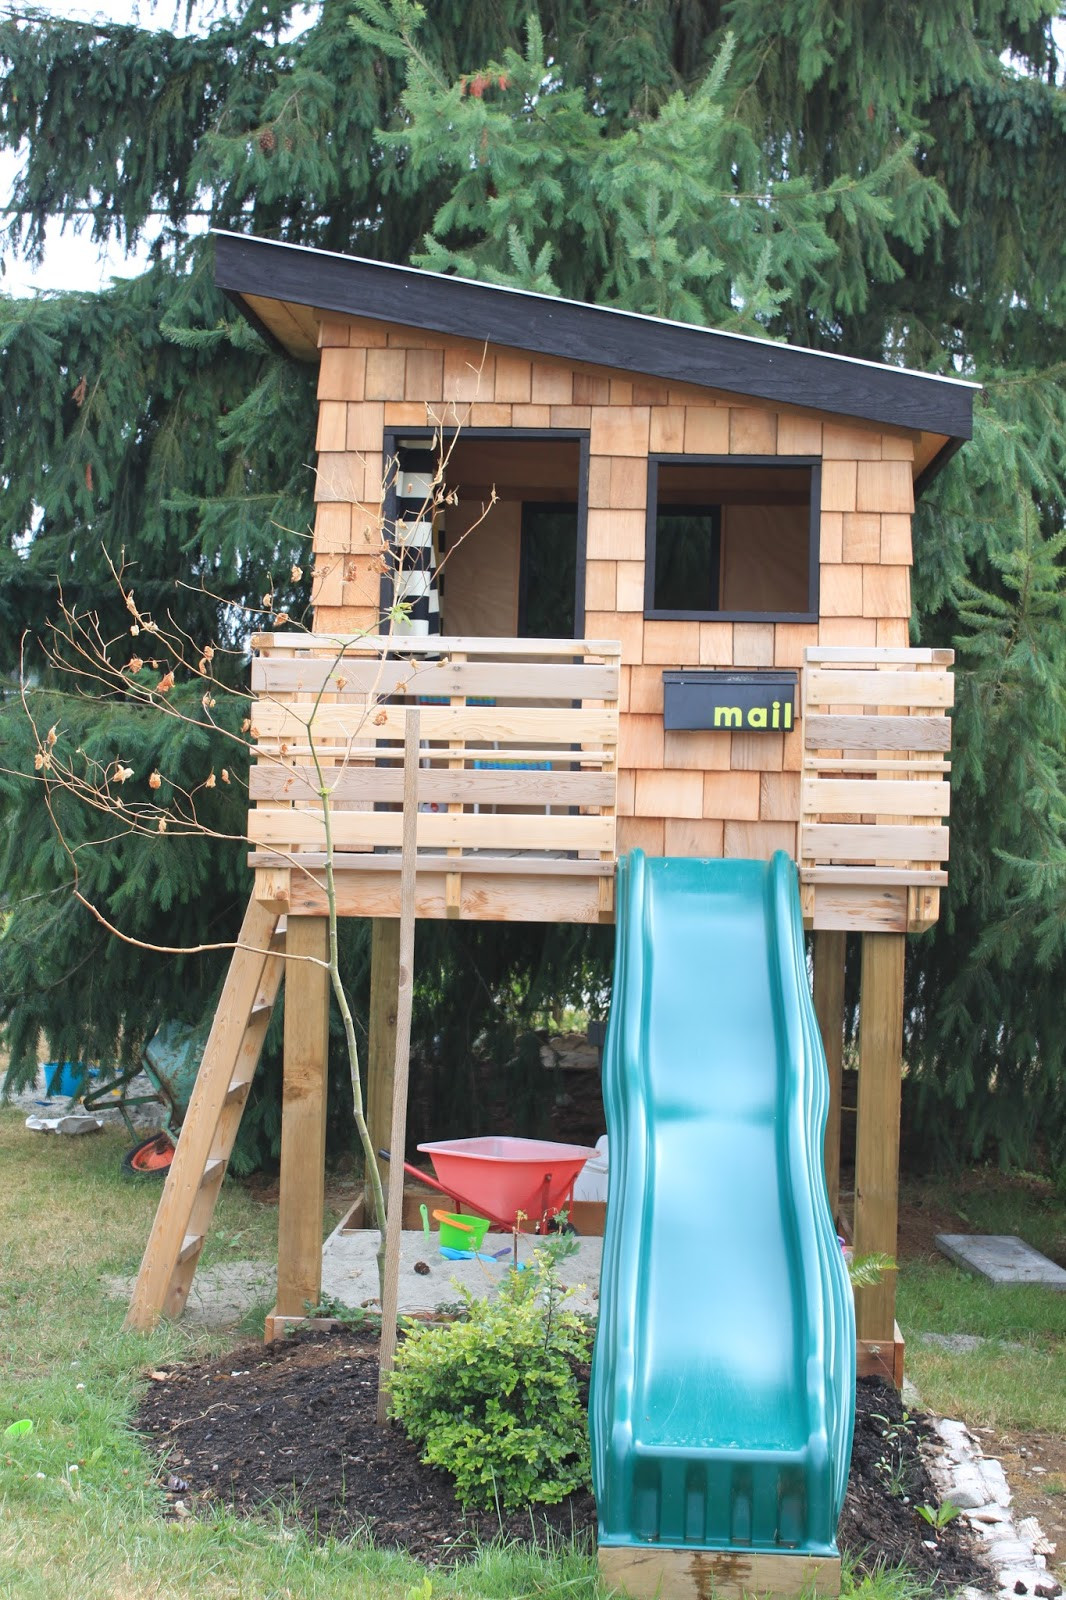 Play House For Kids Outdoor
 15 Pimped Out Playhouses Your Kids Need In The Backyard